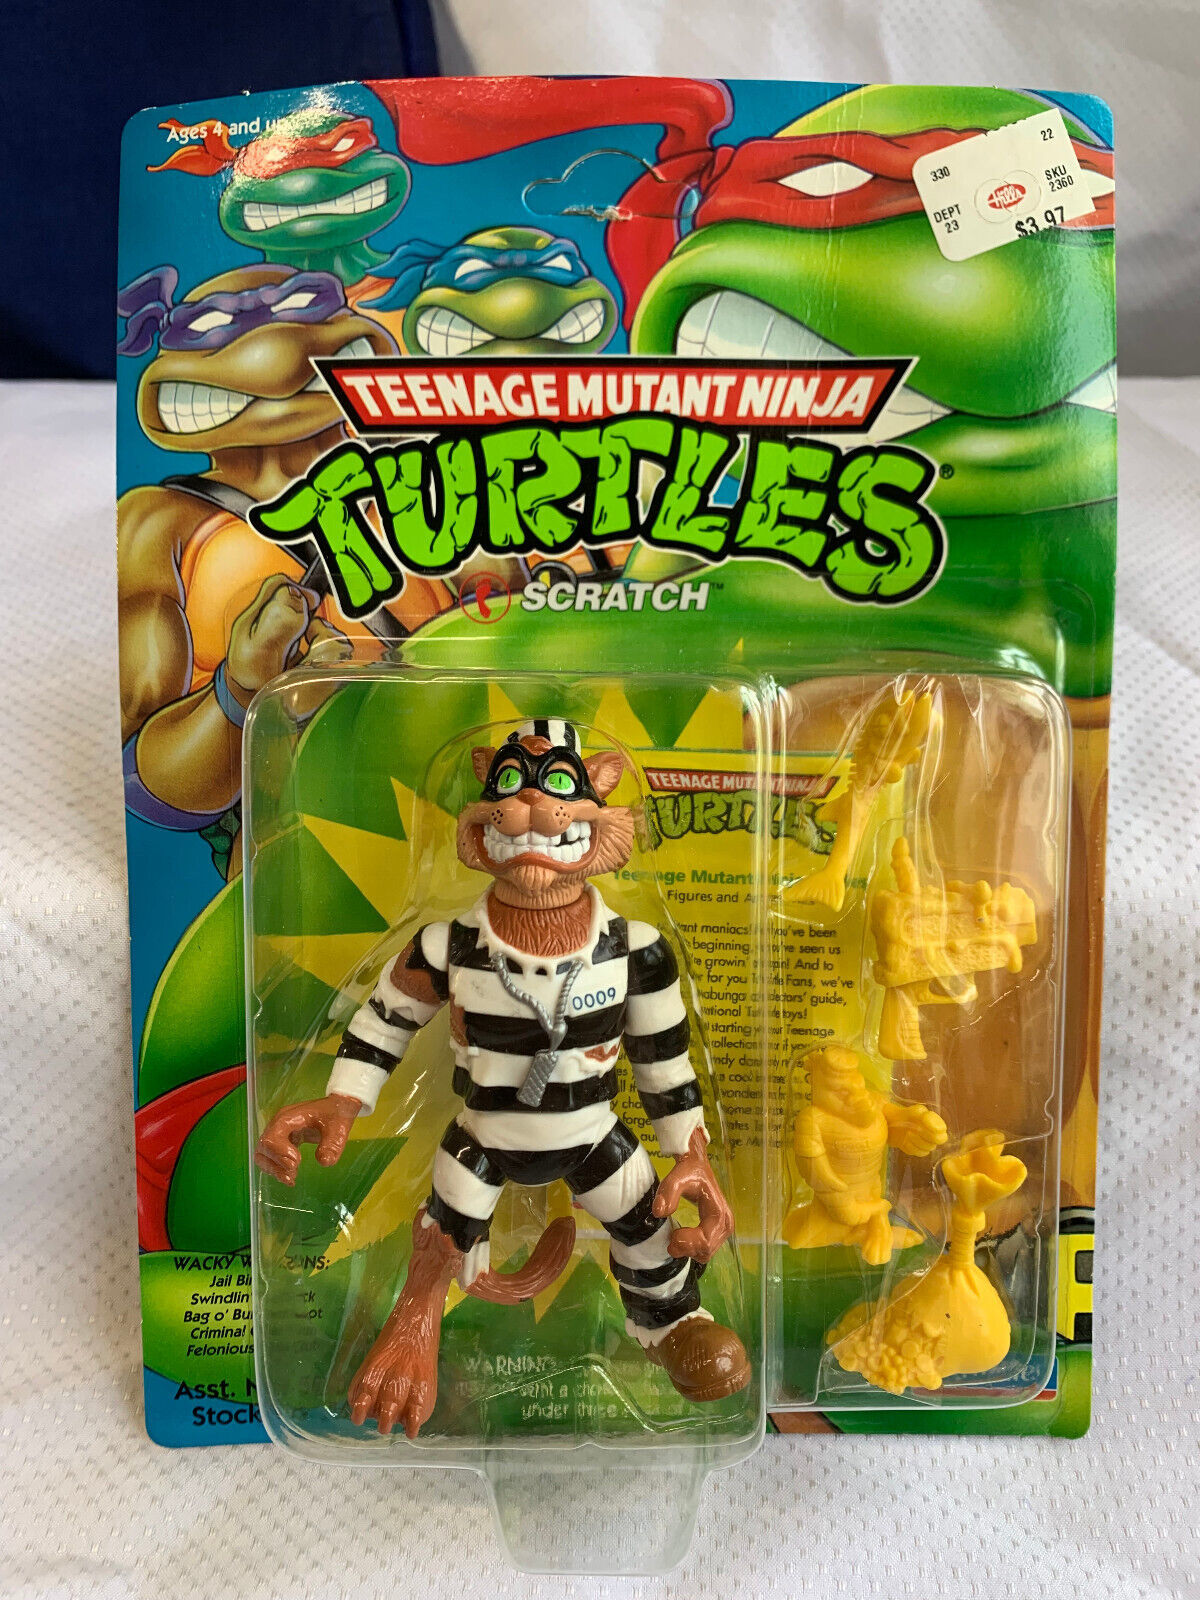 1993 Playmates TMNT SCRATCH Action Figure in Blister Pack UNPUNCHED **READ** - $5,445.00